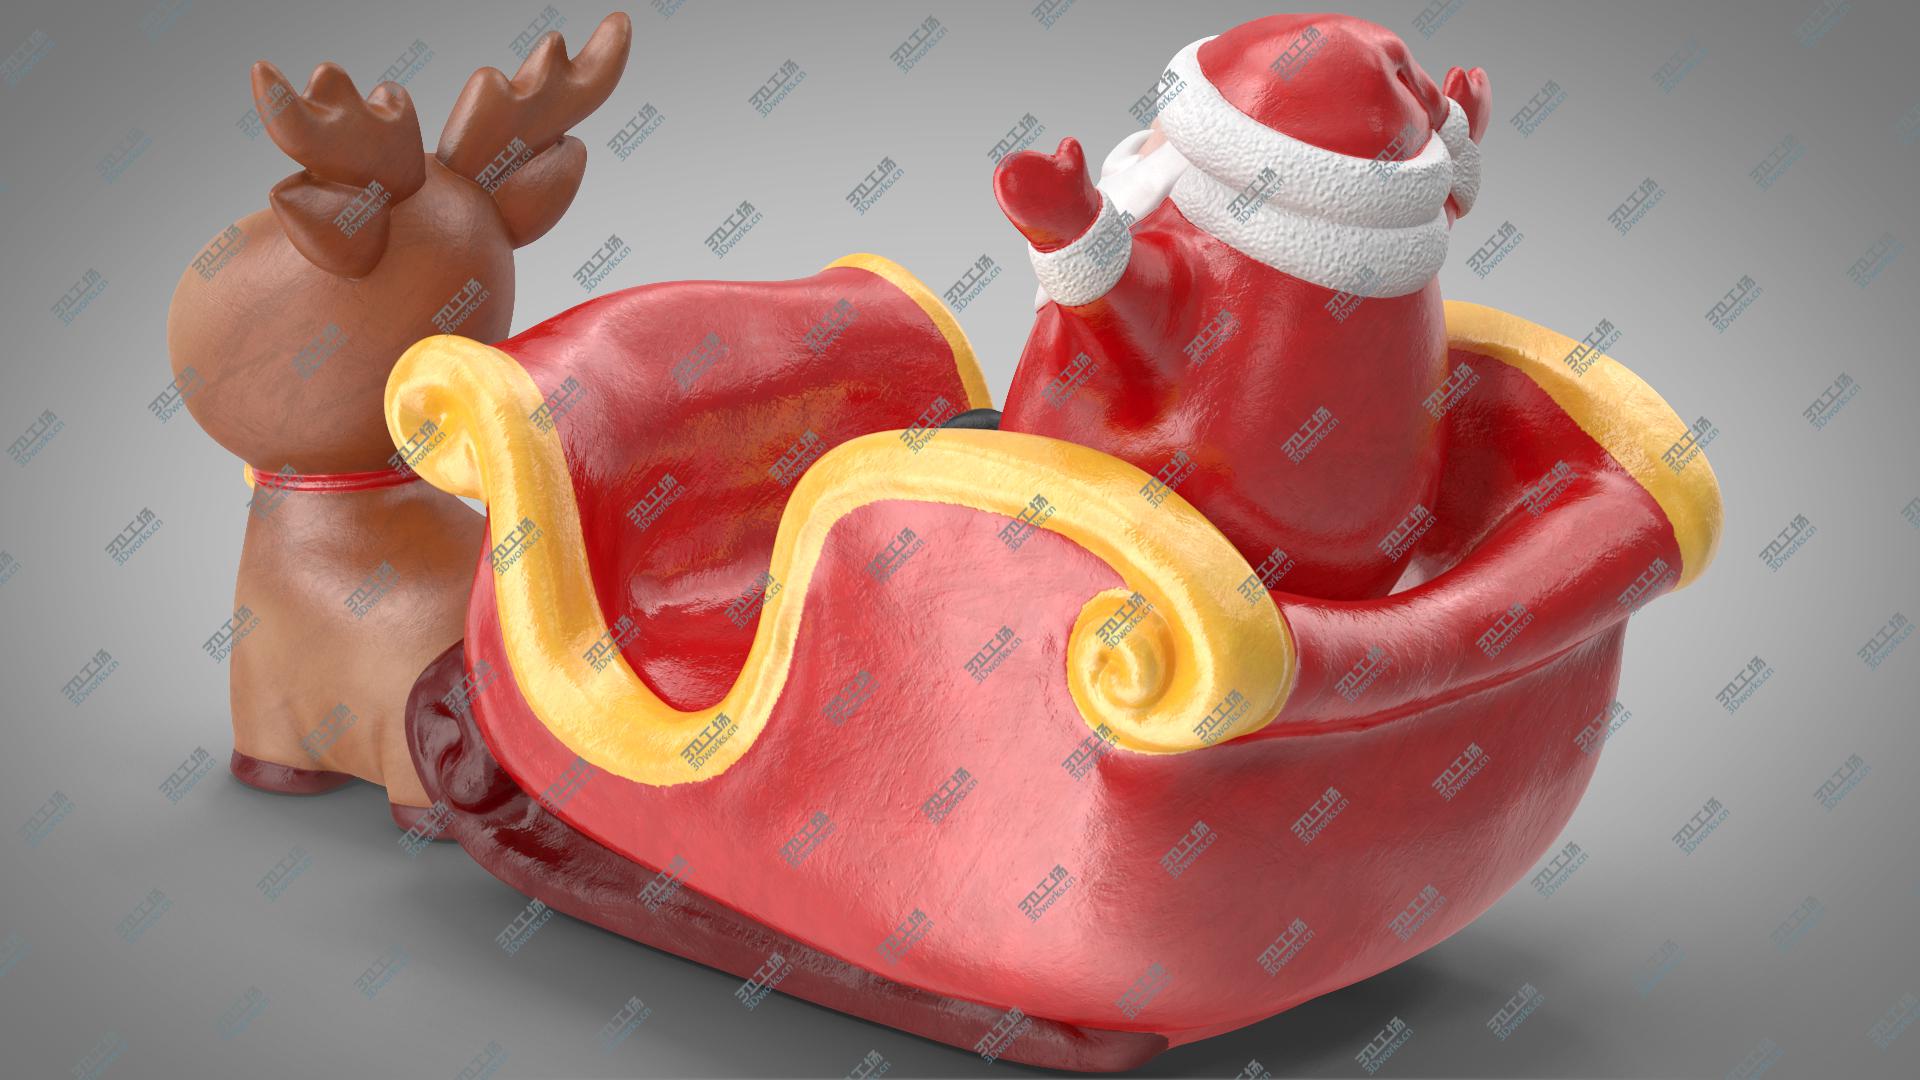 images/goods_img/202105071/Santa Claus with Sleigh Decorative Figurine 2 3D model/5.jpg